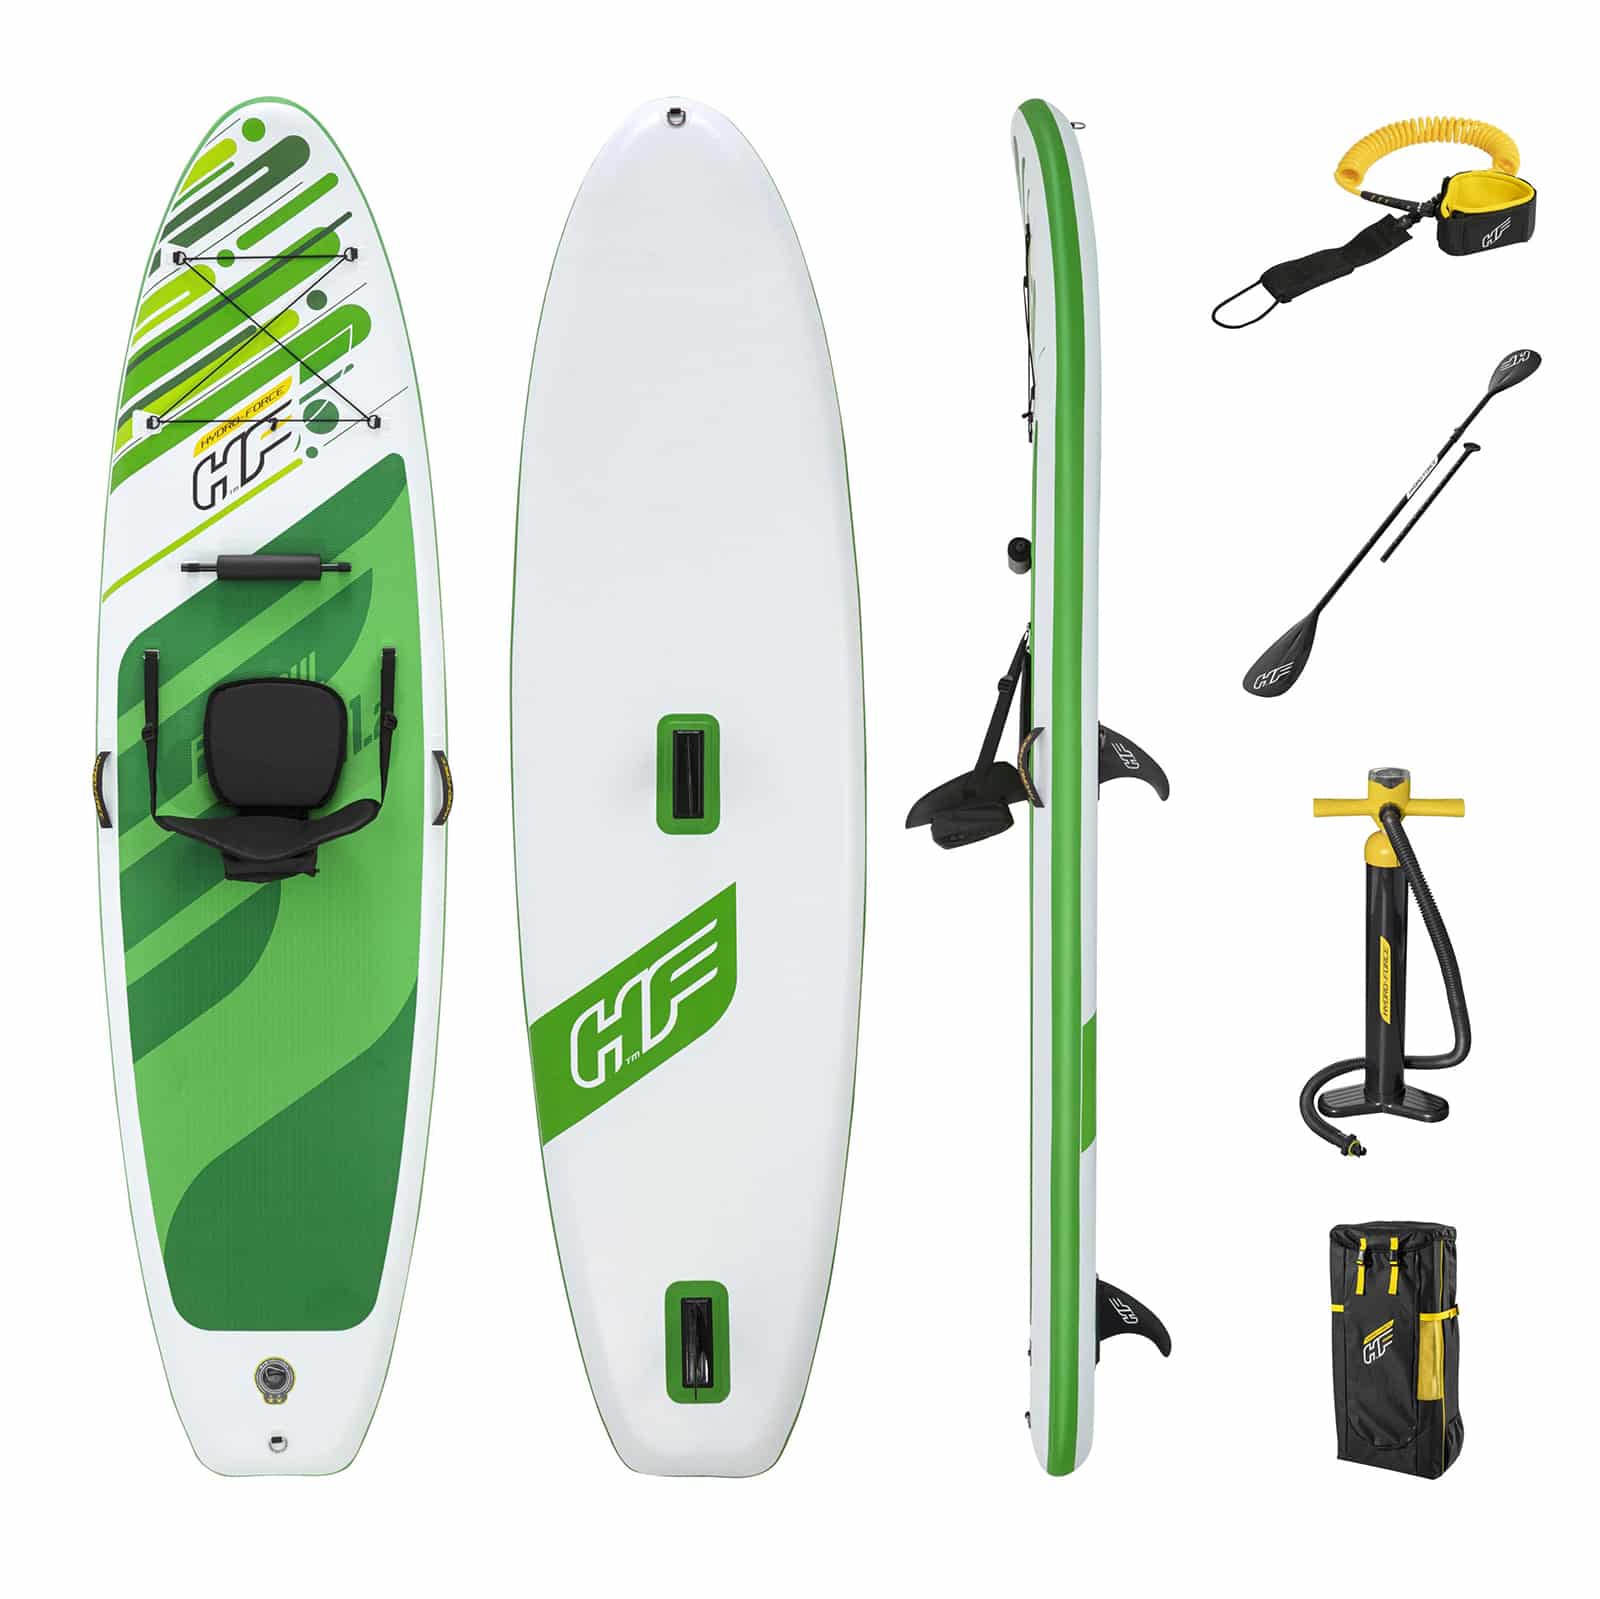 Tabla Paddle Surf Hinchable Bestway Hydro-force Freesoul Tech 340x89x15 Cm Con Remo, Asiento, Bomba - verde - 